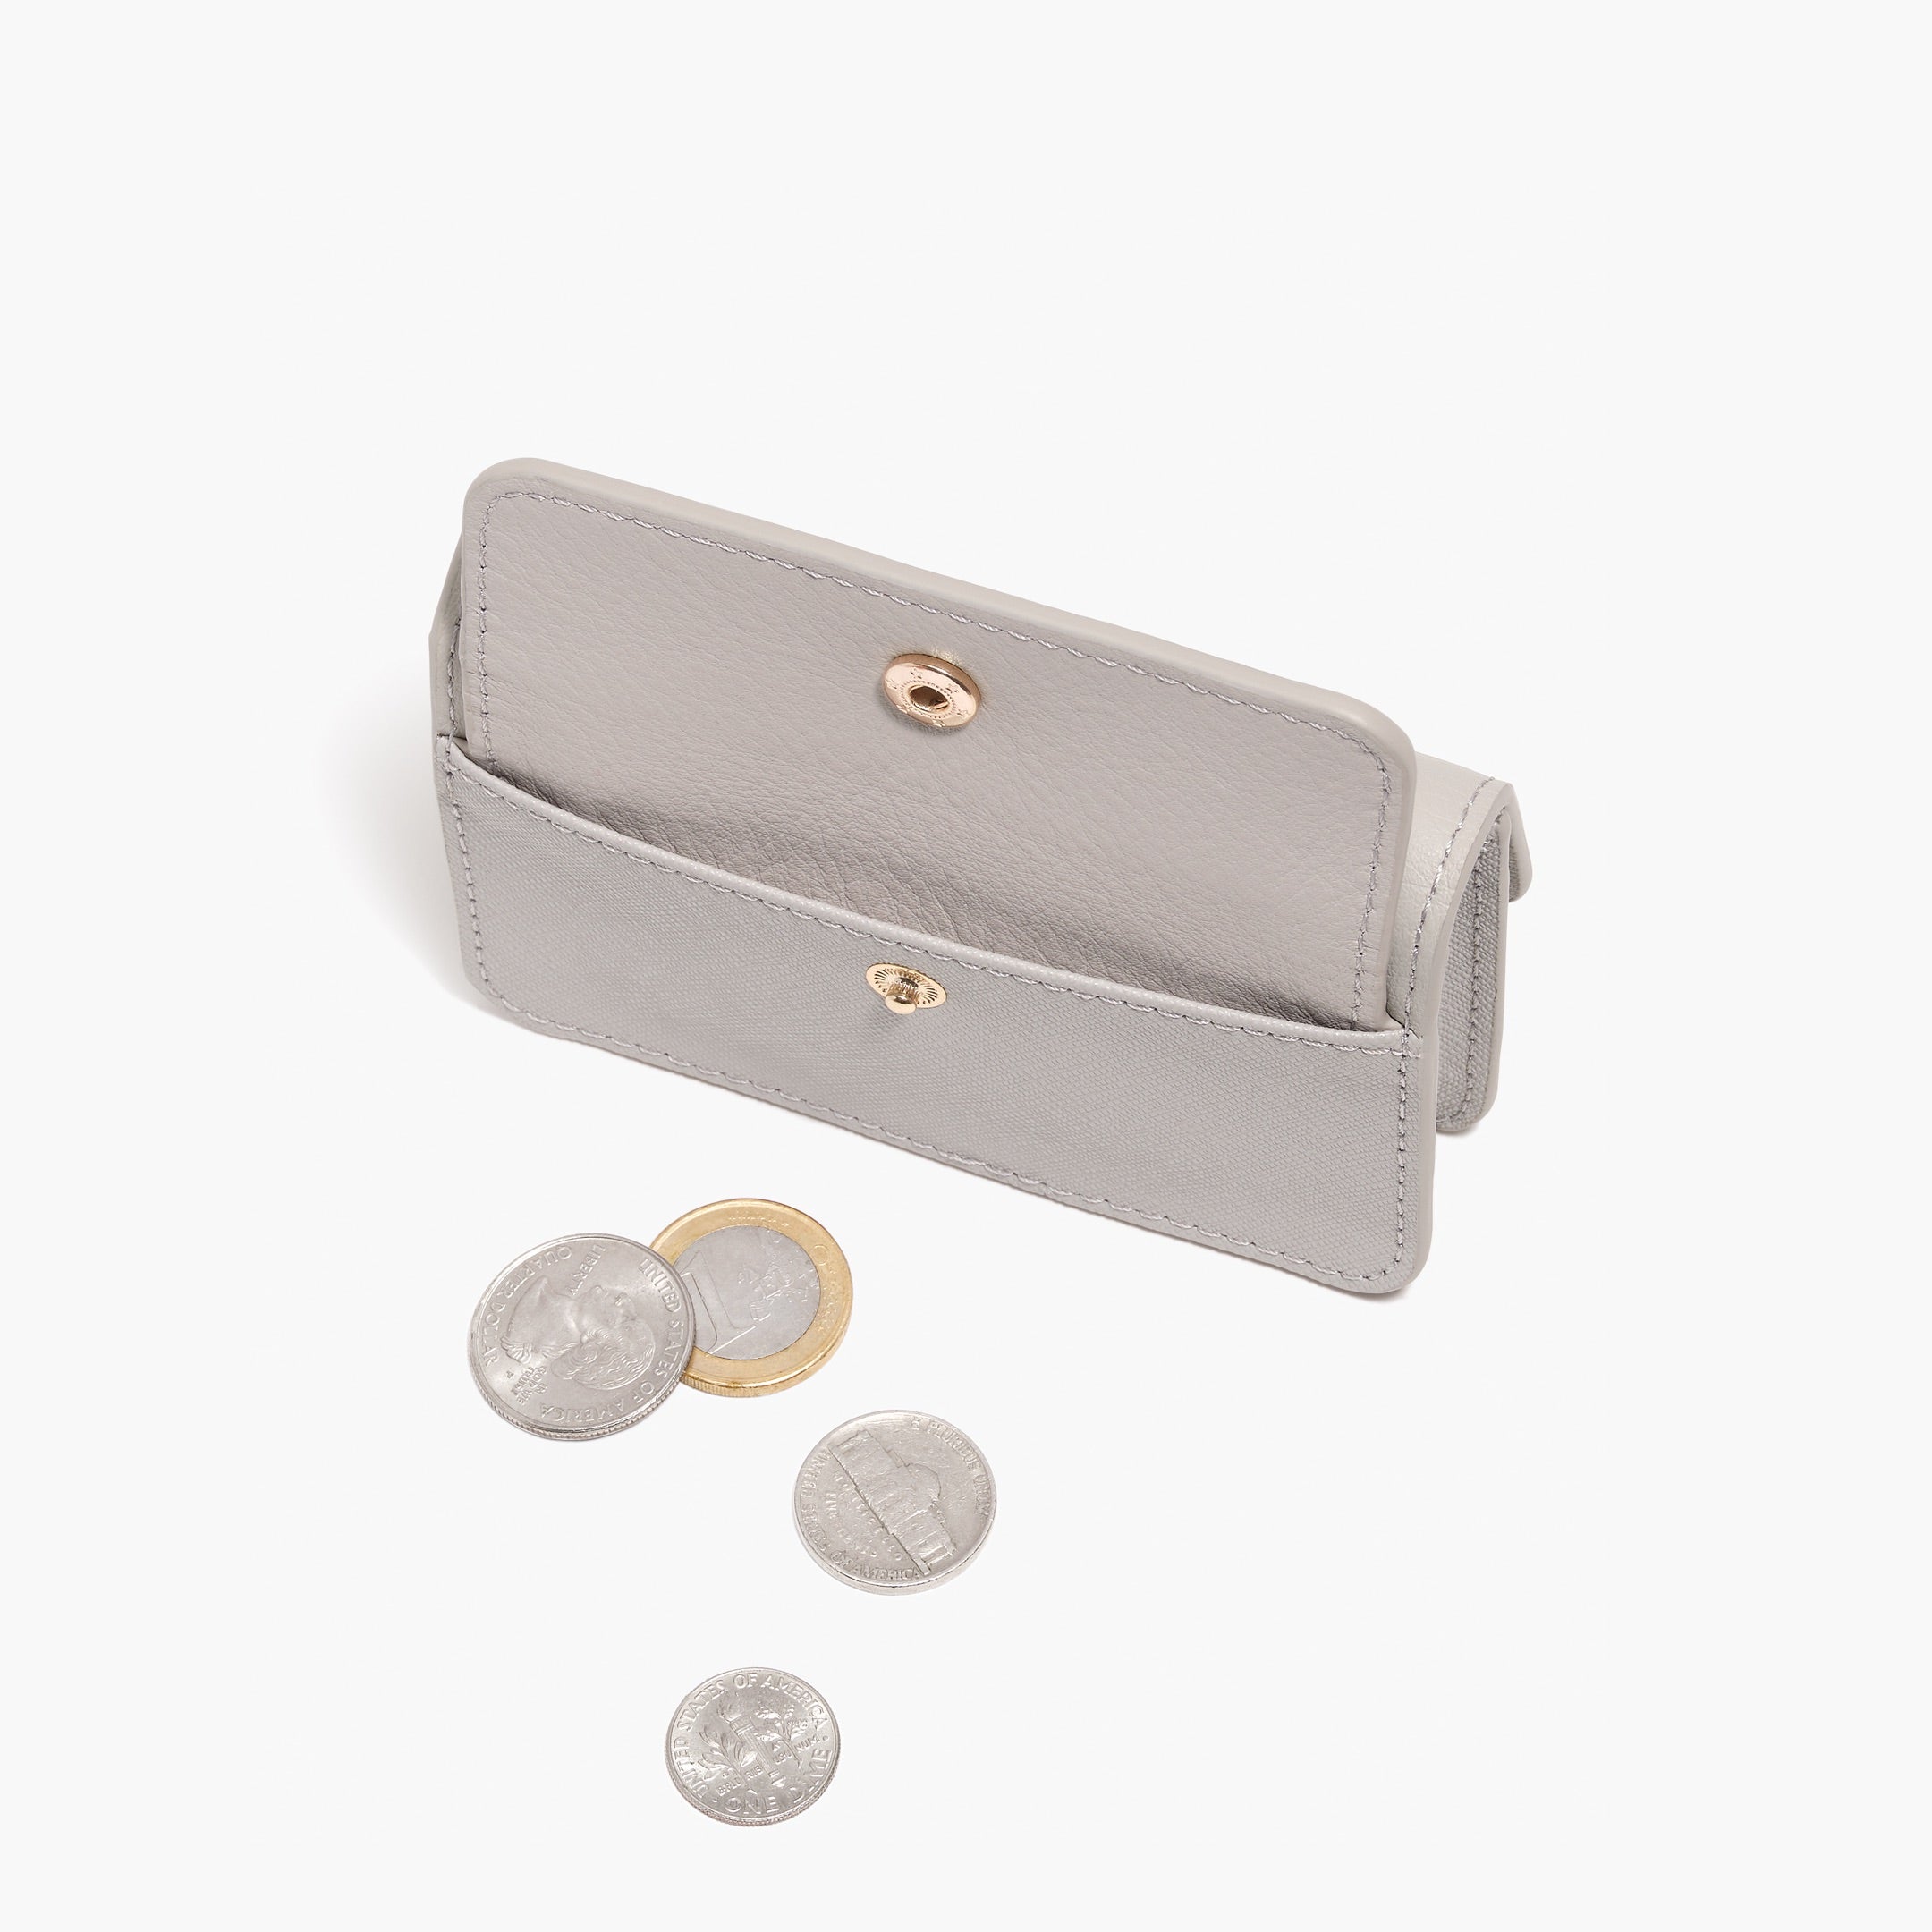 Compact Wallet - Saffiano Leather - Light Grey – Lo & Sons